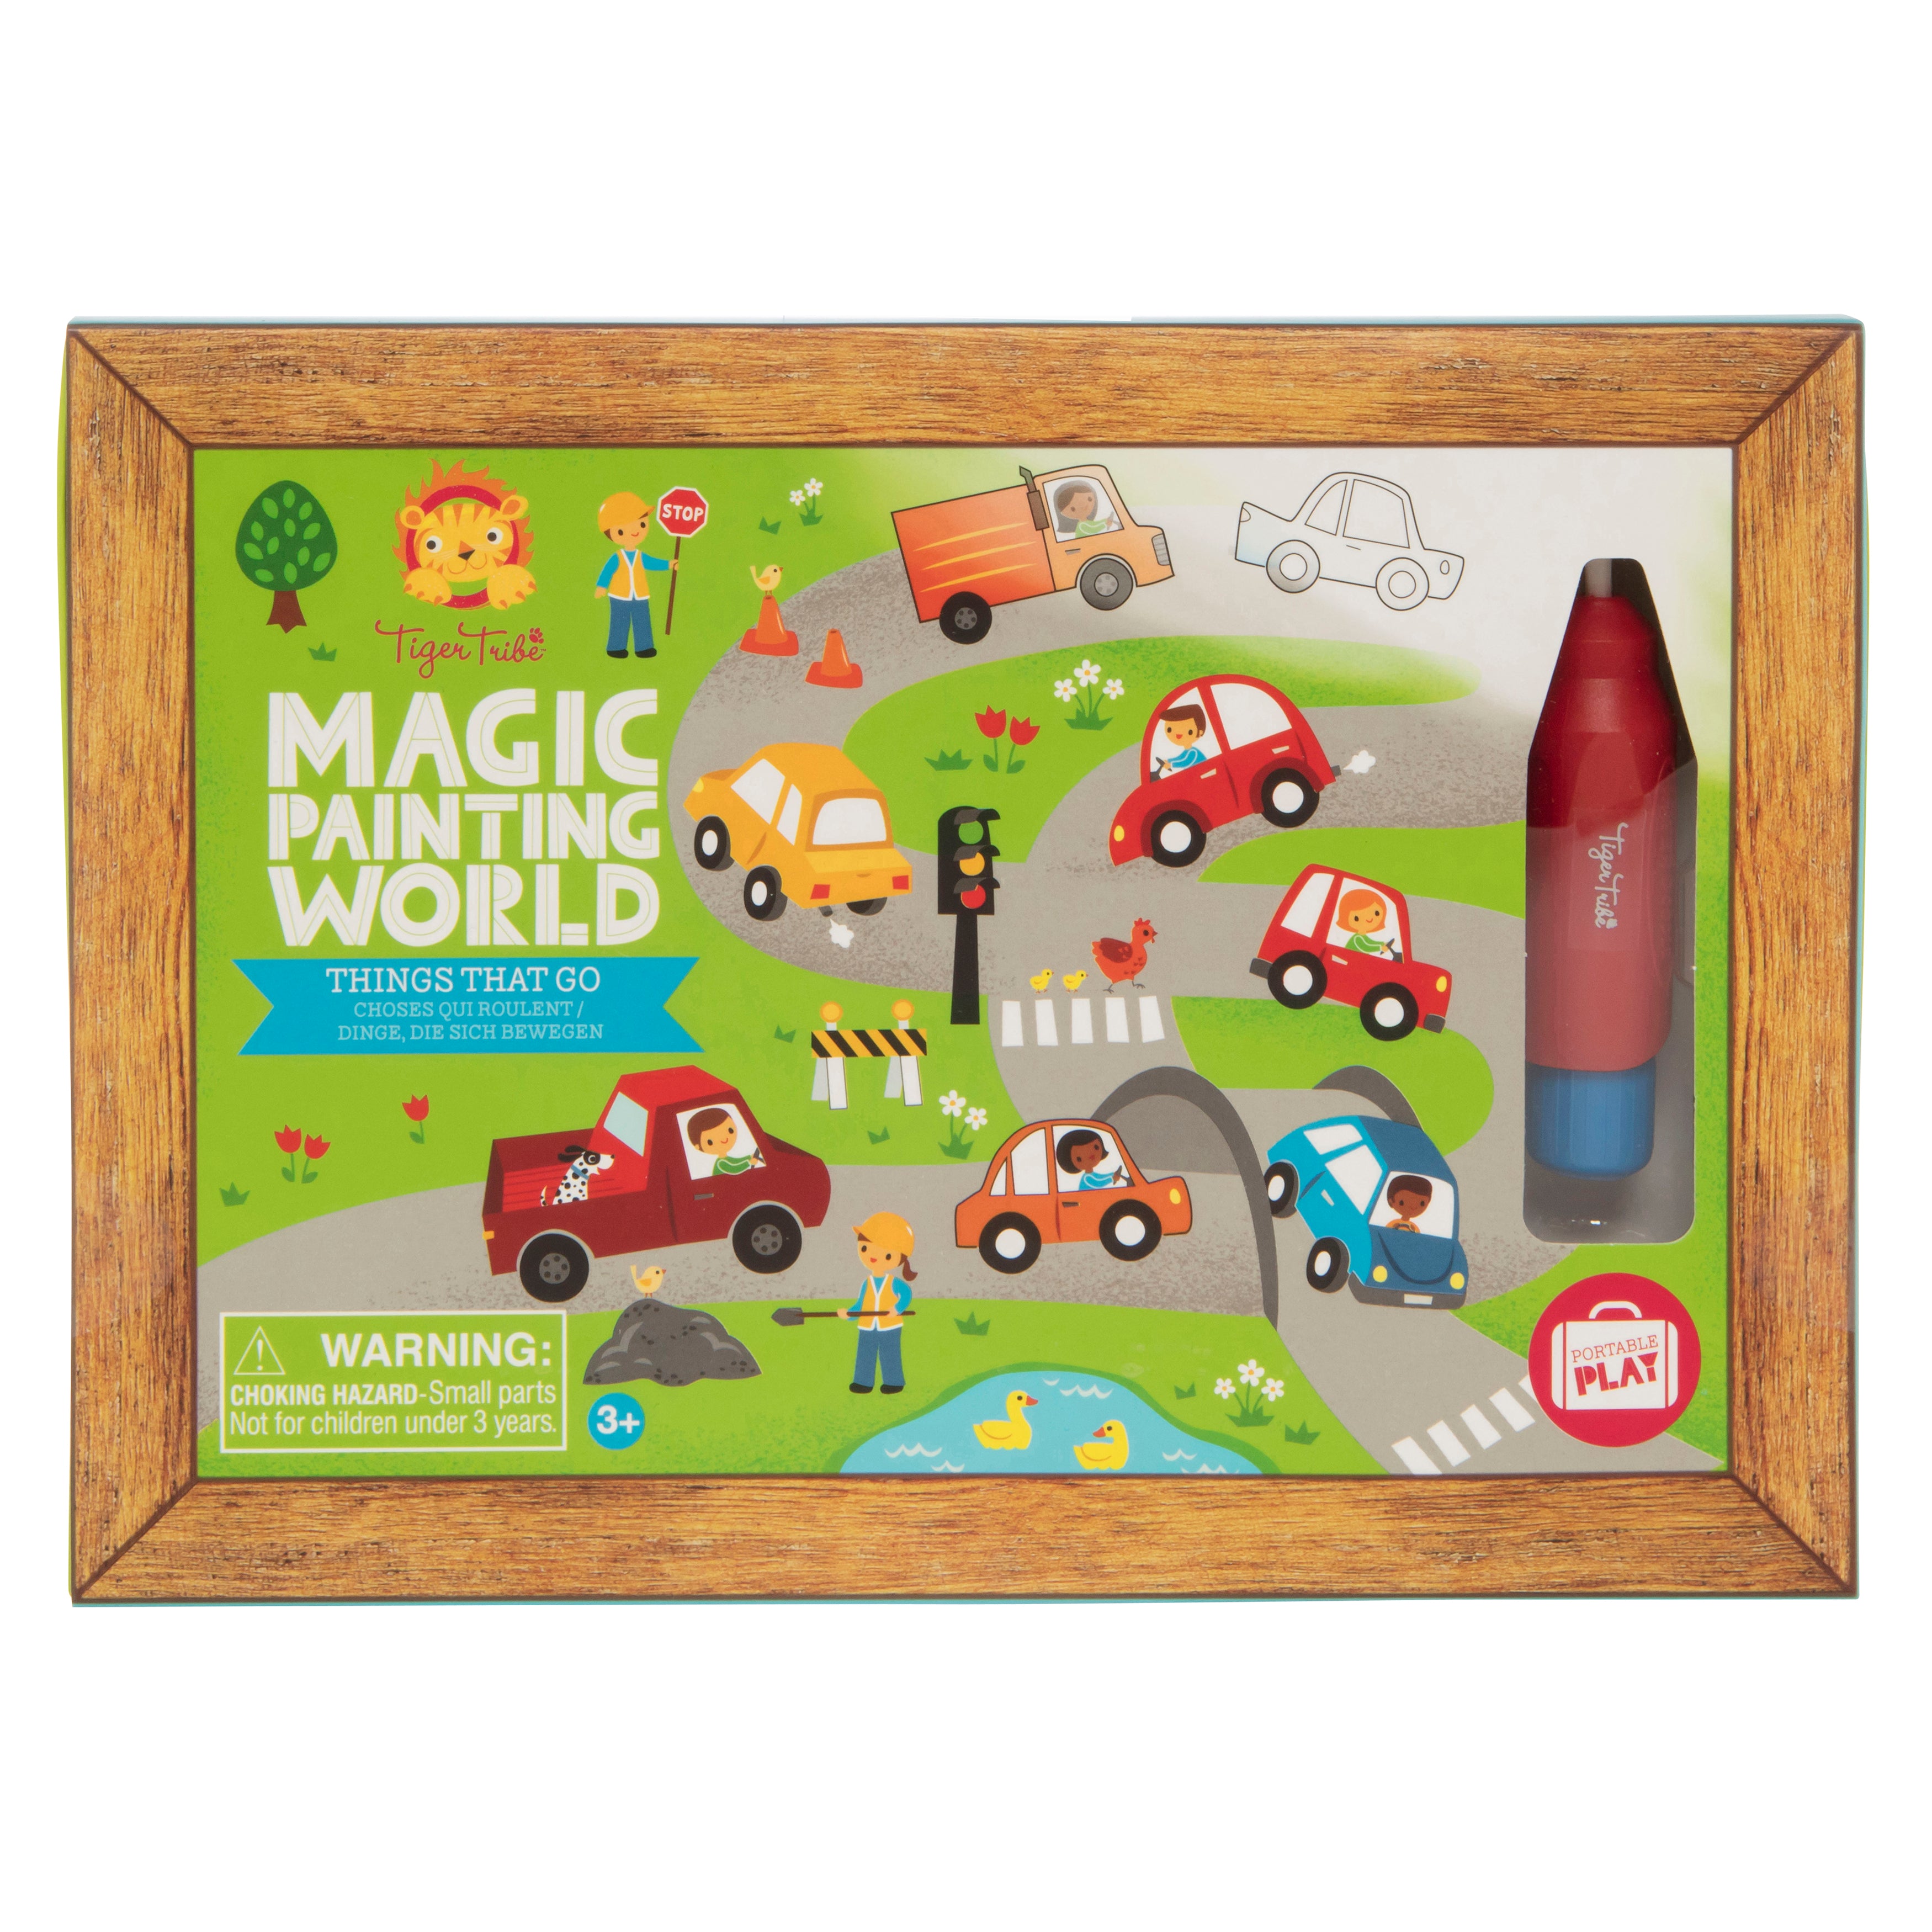 Tiger Tribe Magic Painting World – Things that Go